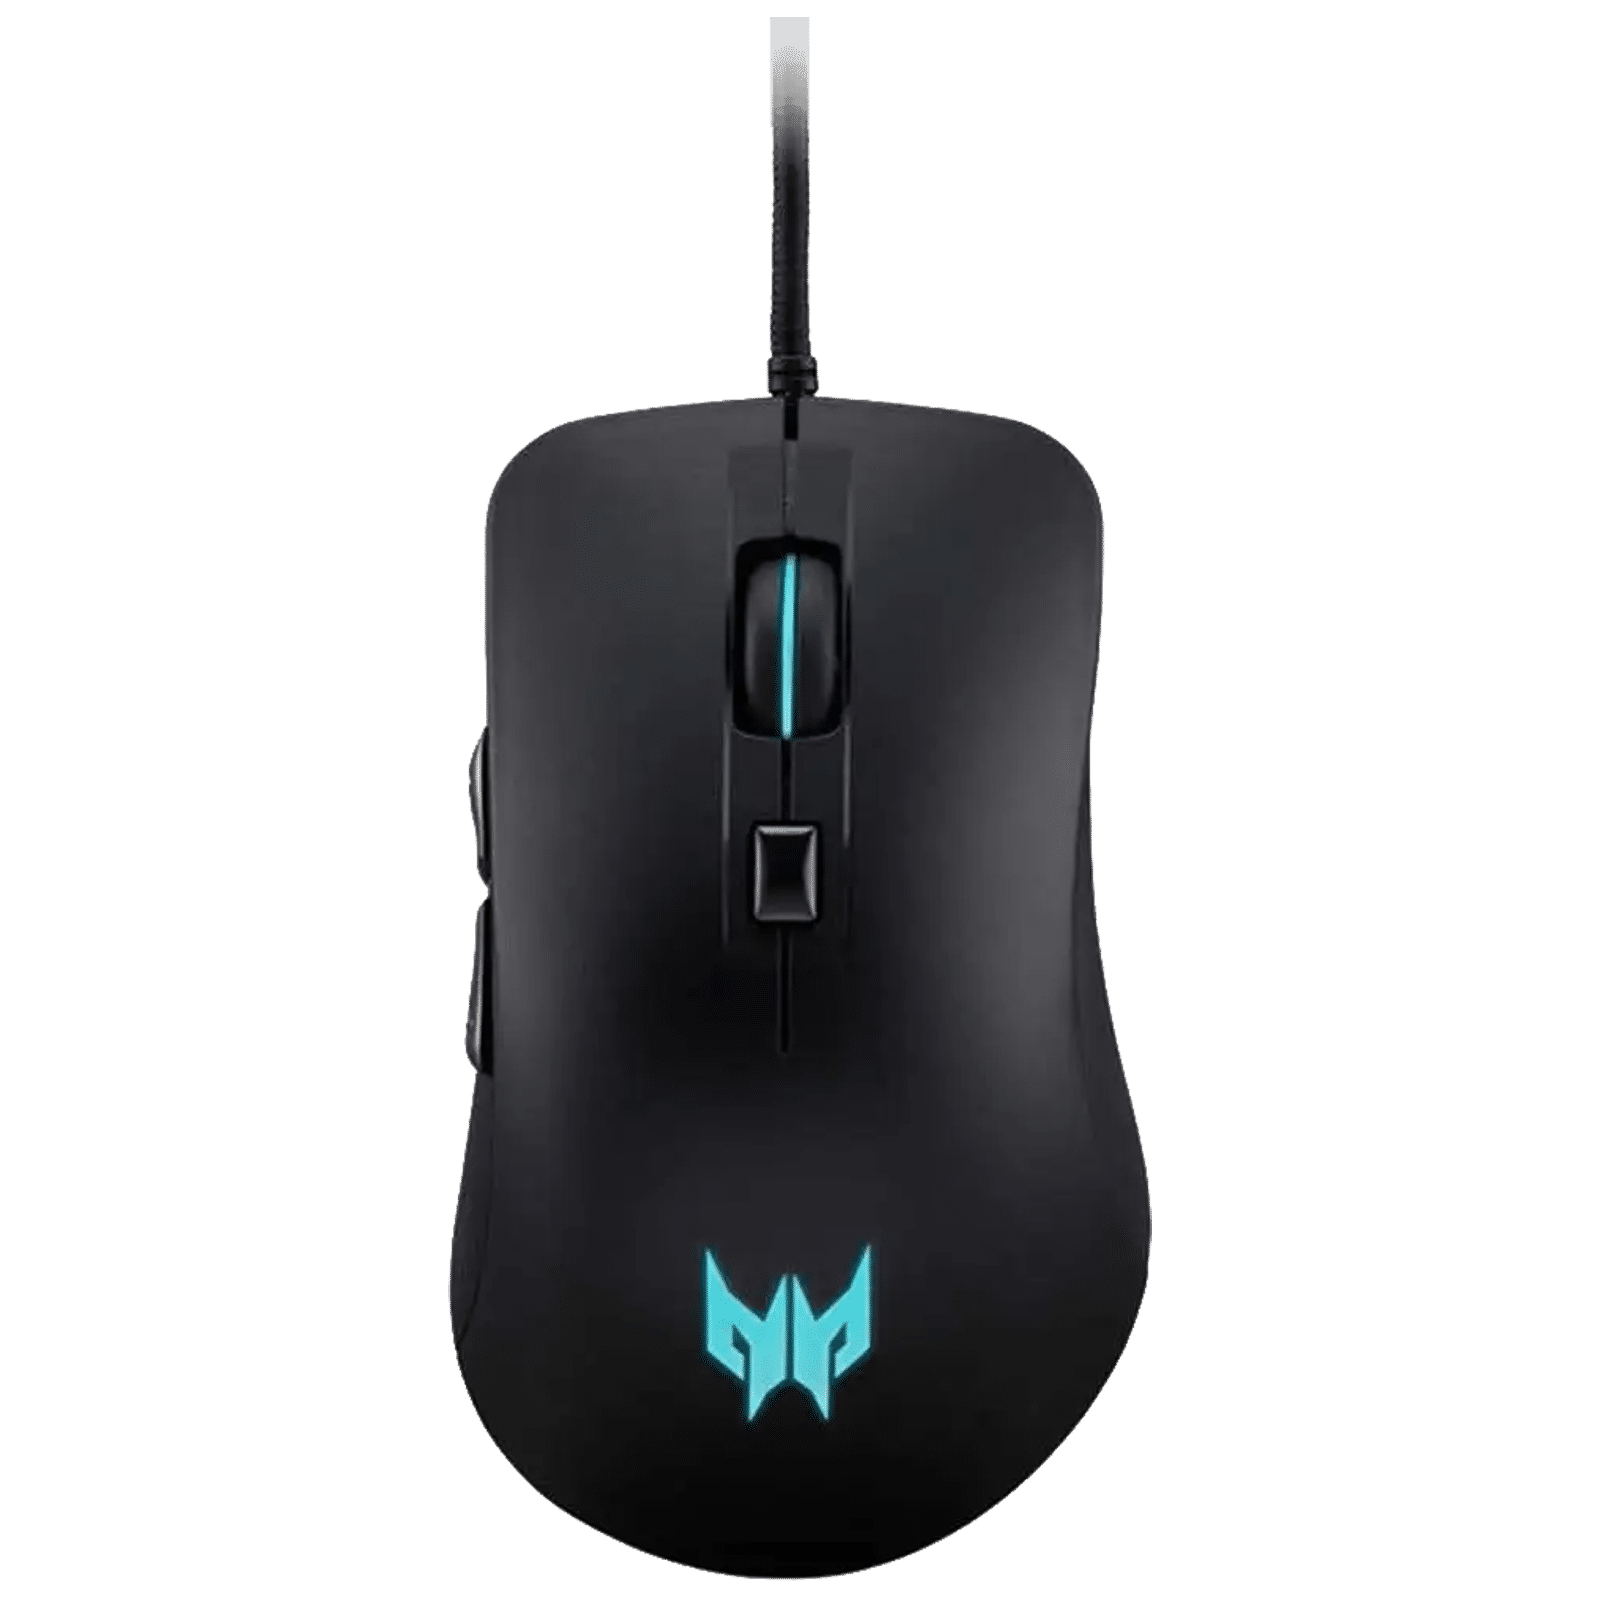 acer Predator Cestus 310 Wired Optical Mouse with 4 Preset Color Settings (4200 DPI, 10 Million Clicks, Black)